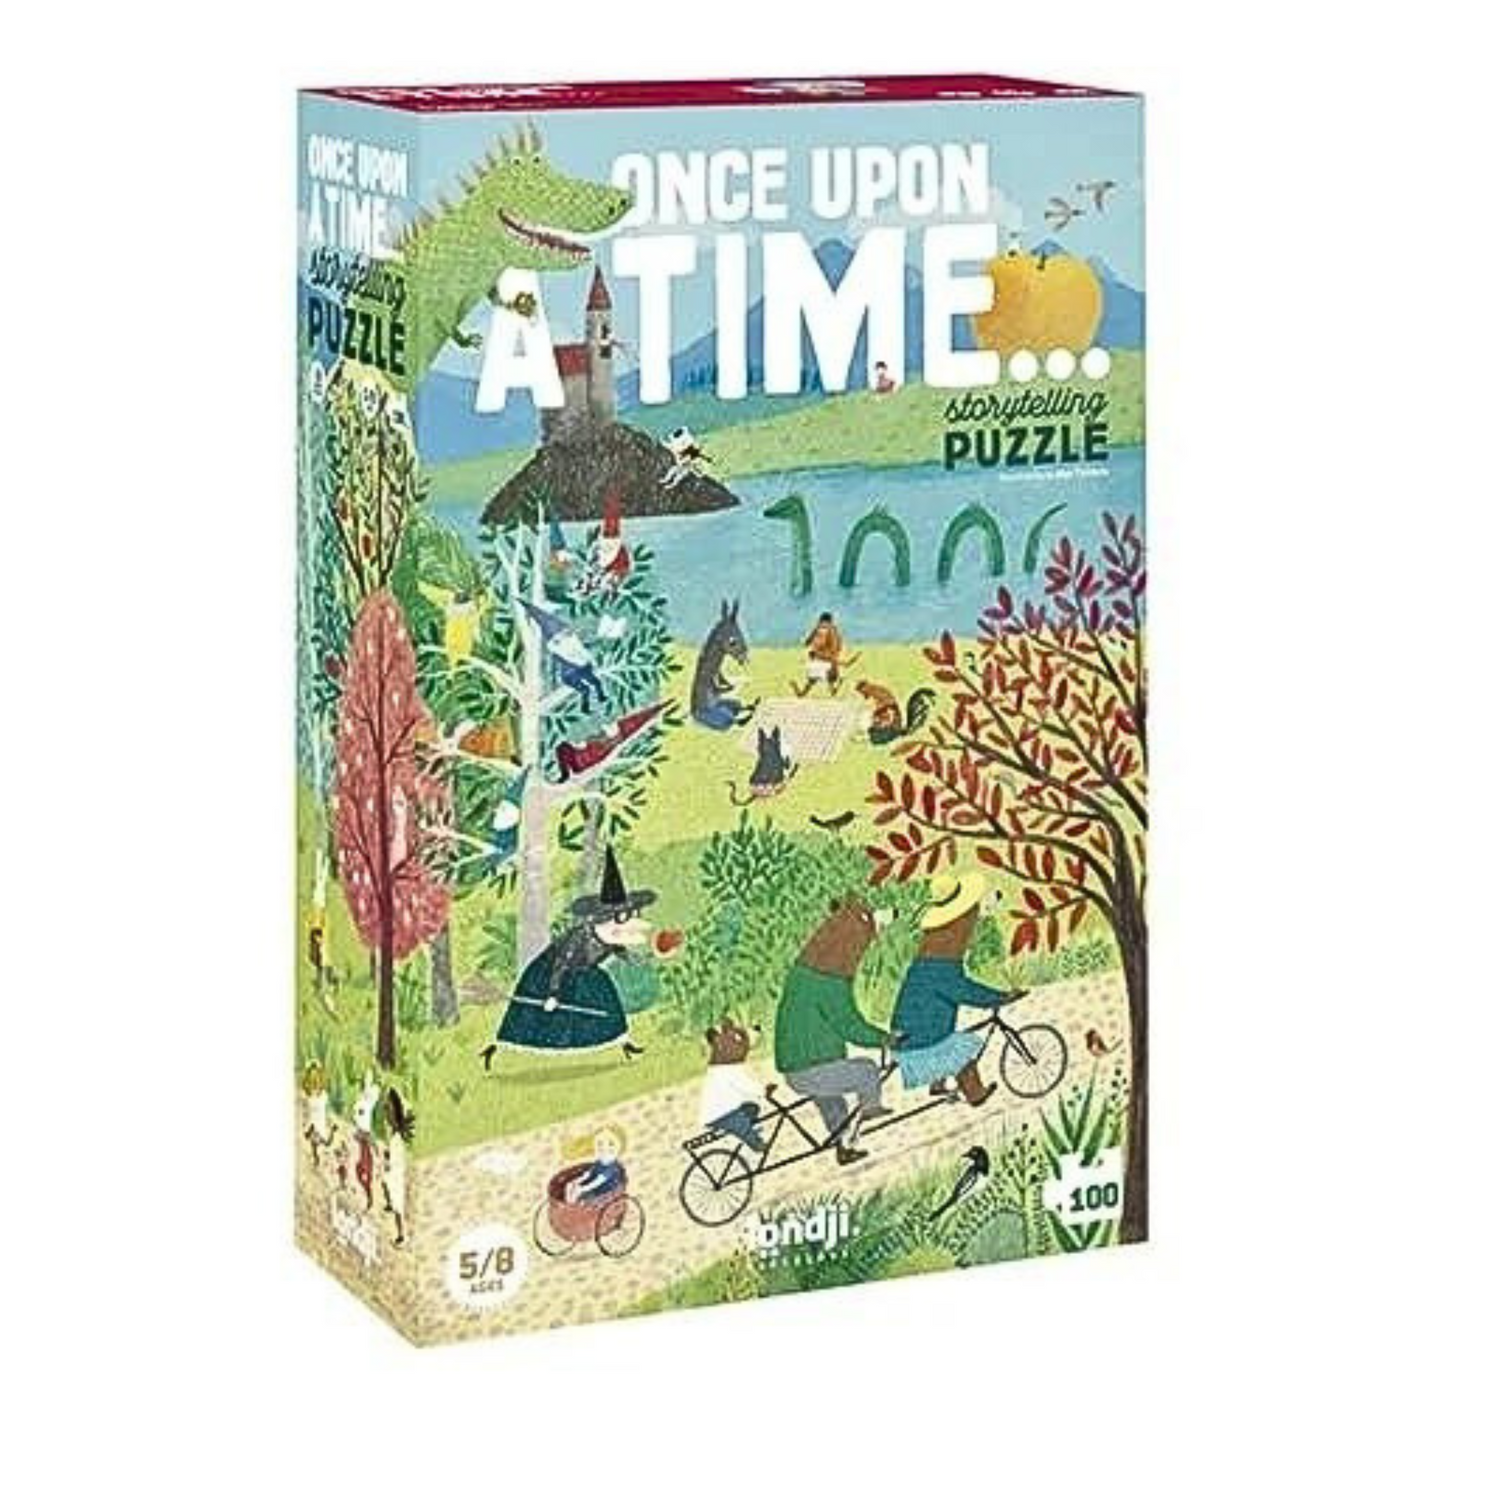 Once Upon a Time puzzle